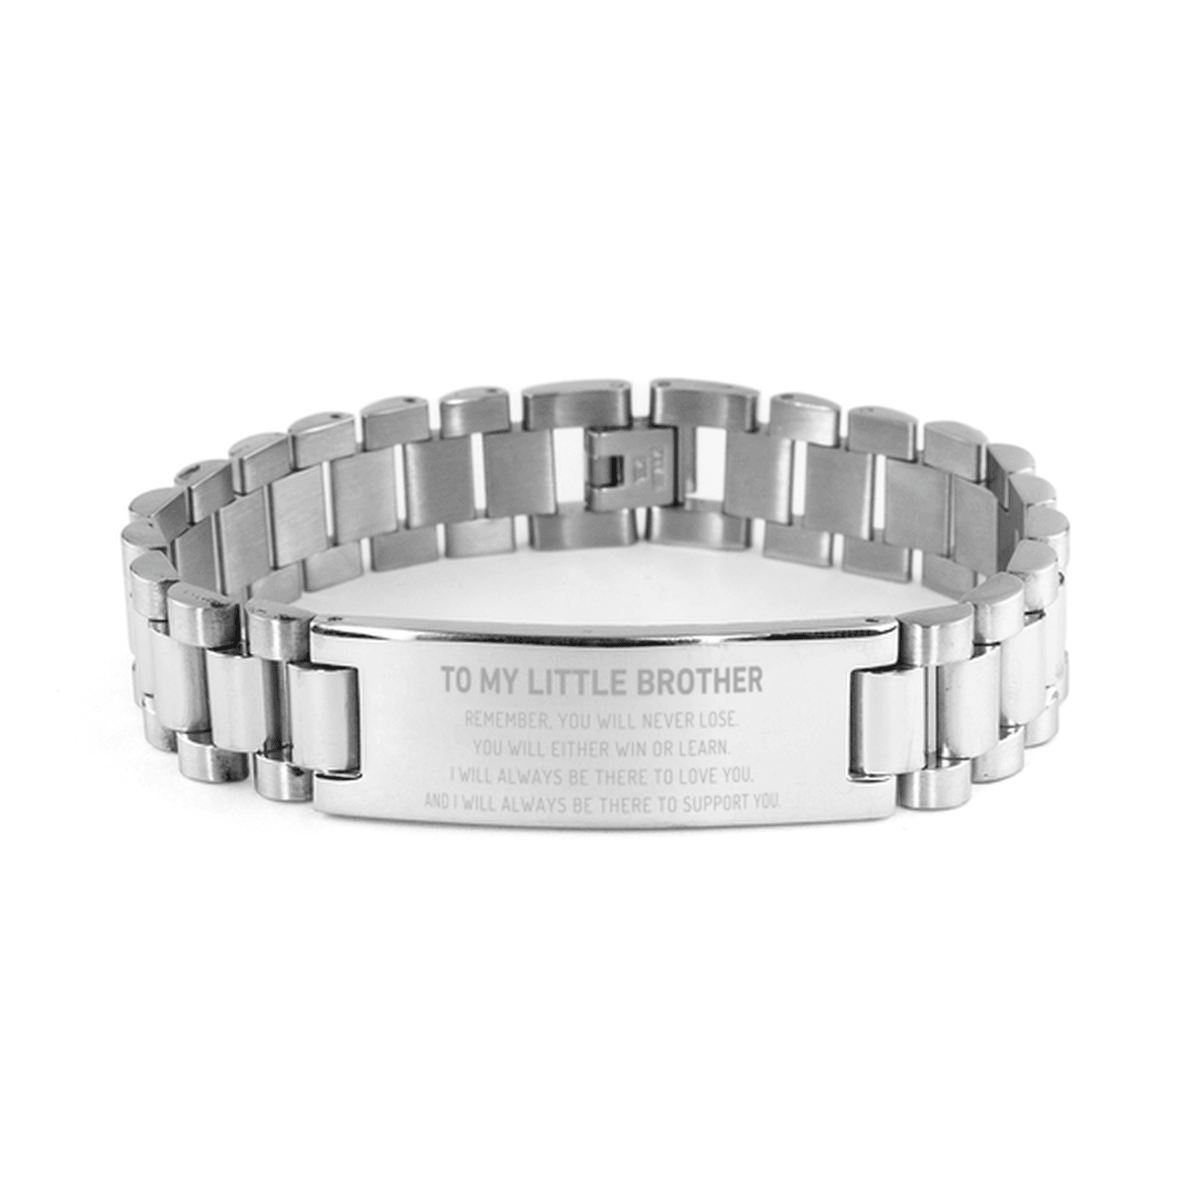 Little Brother Gifts, To My Little Brother Remember, you will never lose. You will either WIN or LEARN, Keepsake Ladder Stainless Steel Bracelet For Little Brother Engraved, Birthday Christmas Gifts Ideas For Little Brother X-mas Gifts